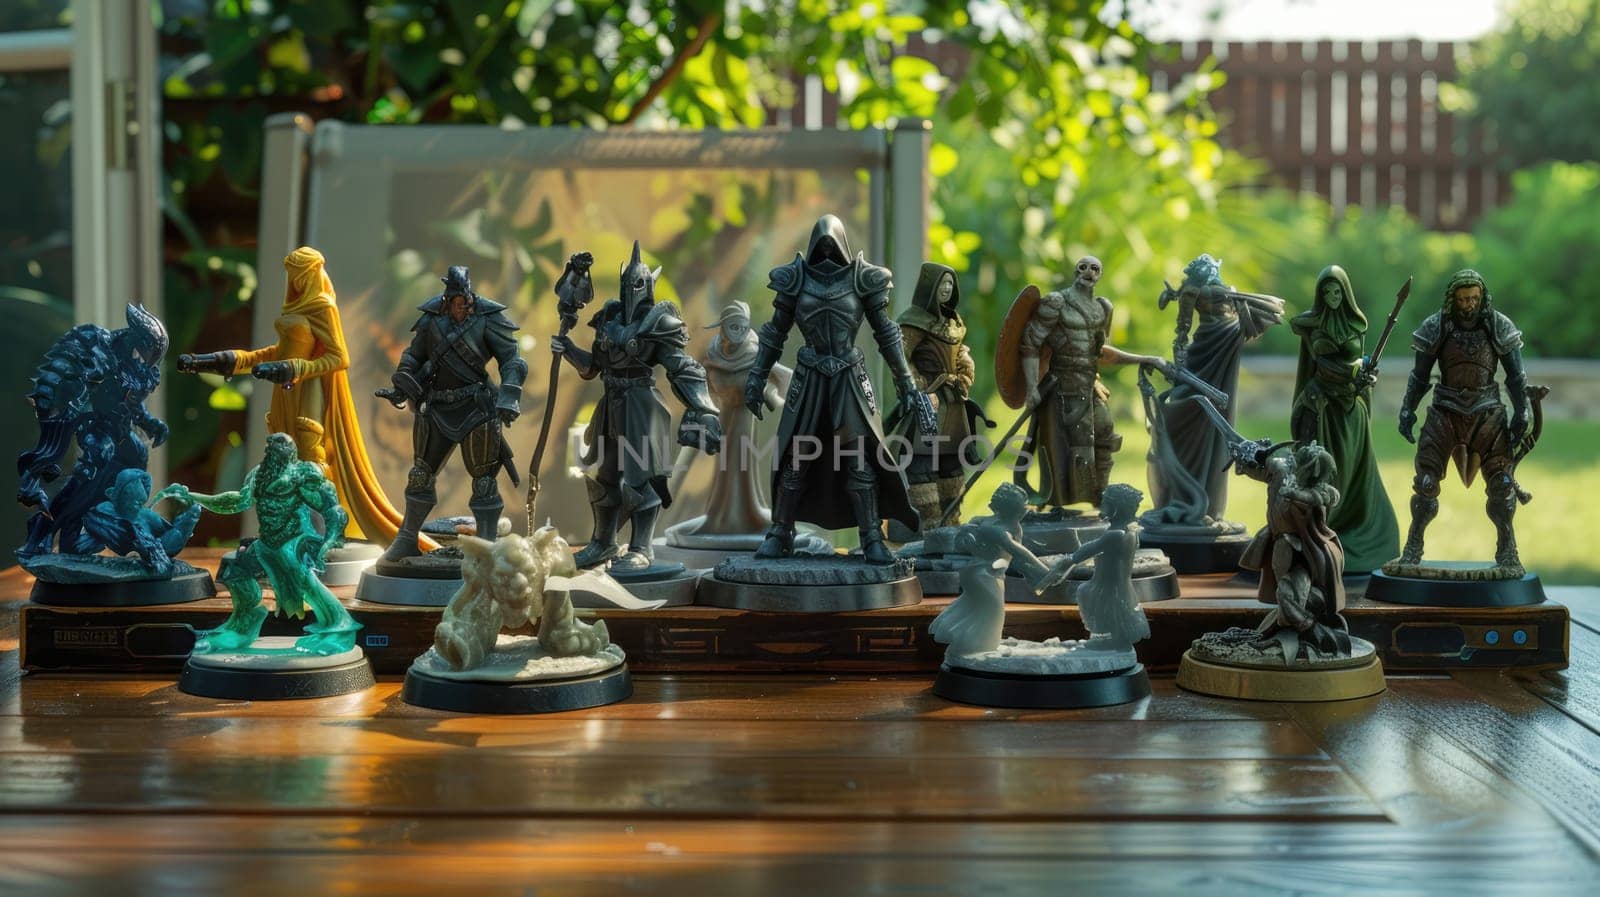 DND figures with various characters and fantasy creatures. by natali_brill